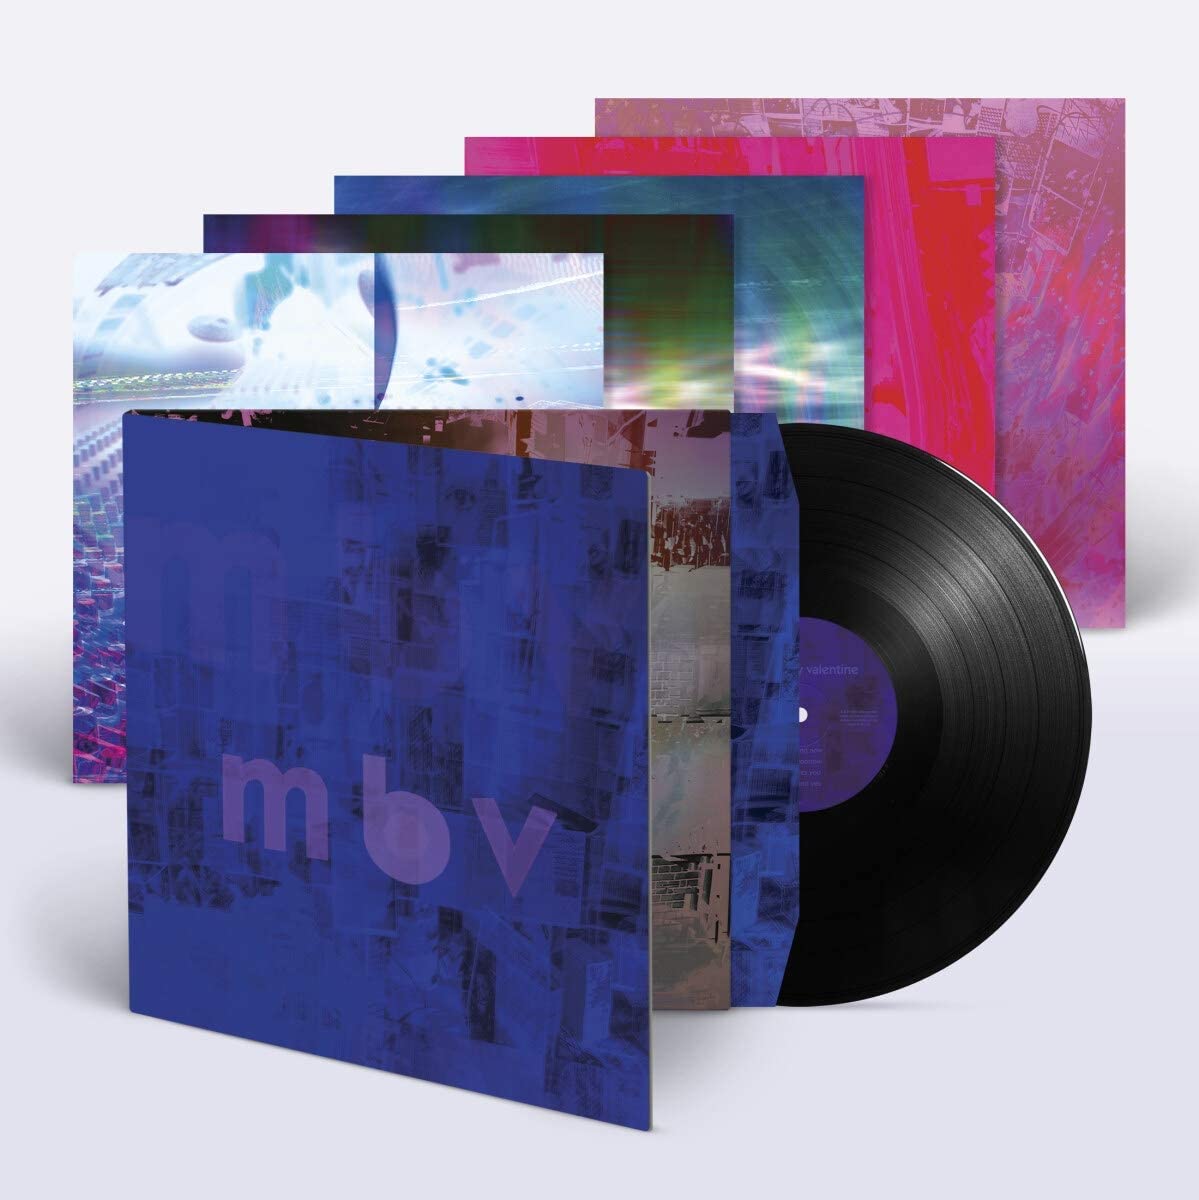 Continuing to push boundaries of both music and genre, 'm b v' is an album of astonishing music, some of which could lay claim to being of a type never been made before. Otherworldly, intimate and a visceral listen, 'm b v' is a startling and beautiful metamorphosis of what was known of the my bloody valentine sound, pushing the boundaries of genre unlike any other band.